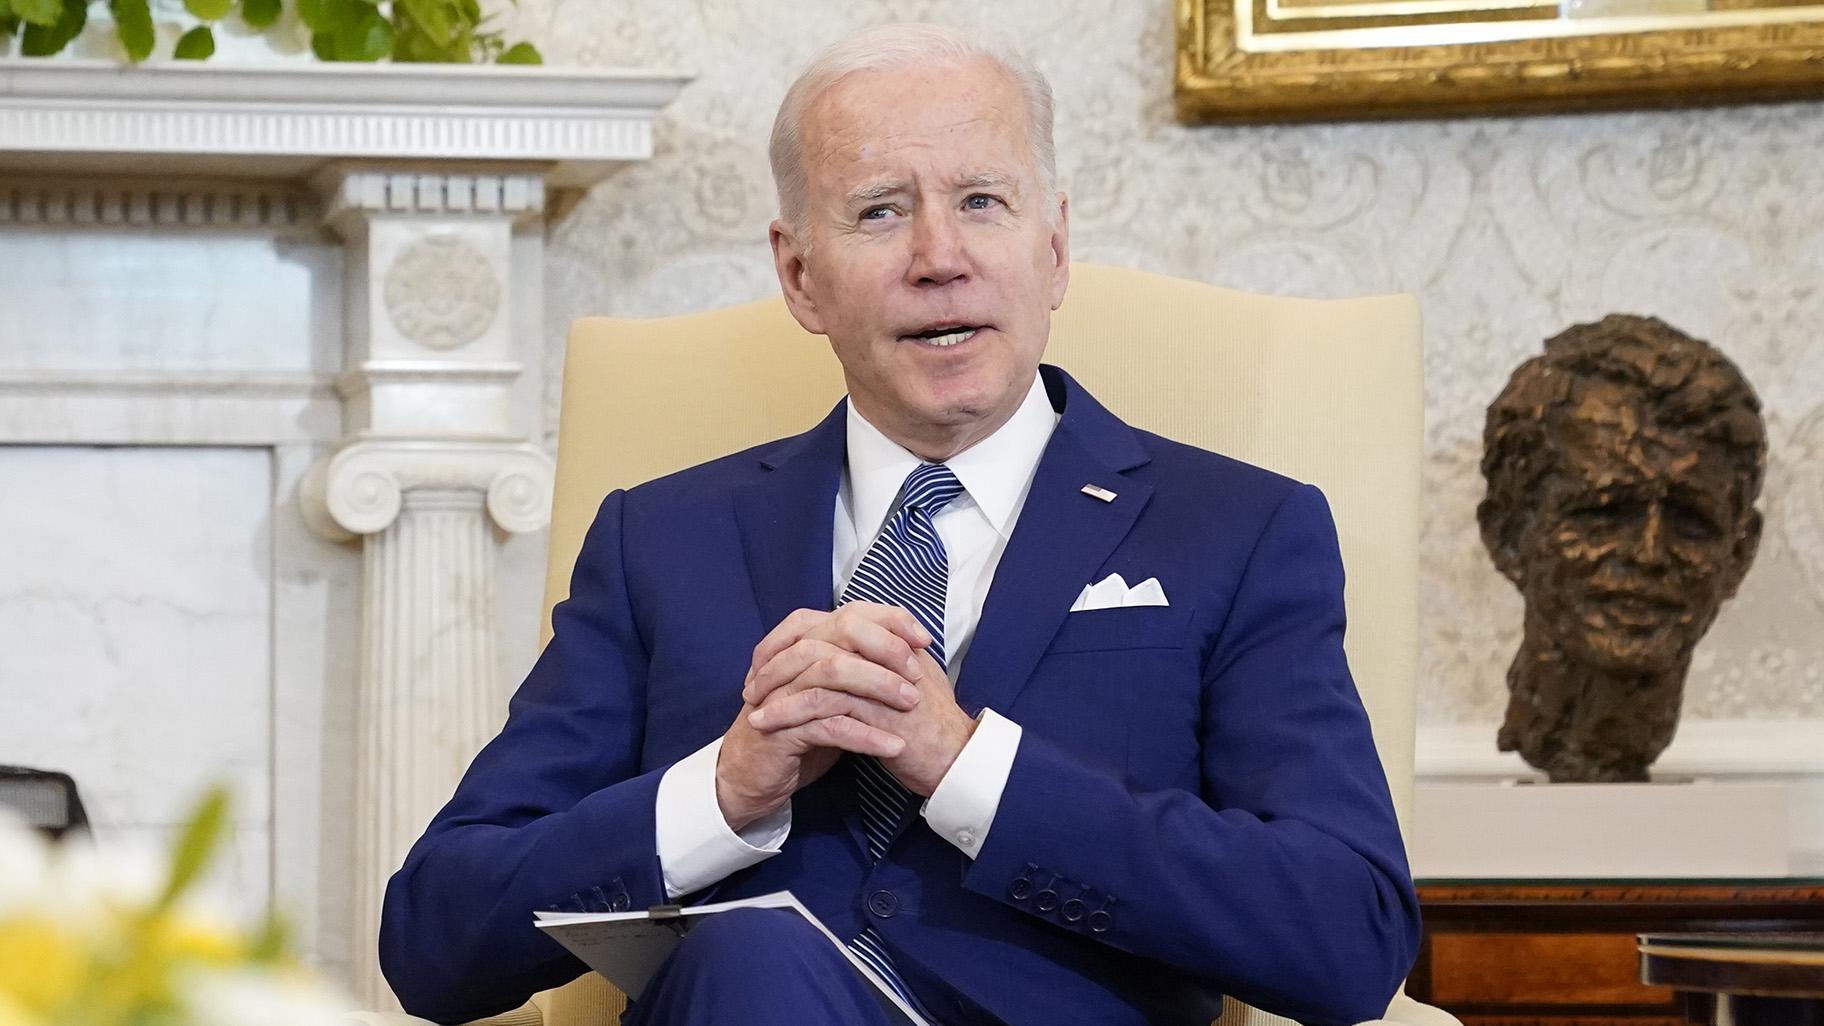 President Joe Biden sits in the Oval Office of the White House, on March 4, 2022, in Washington. (AP Photo / Patrick Semansky)